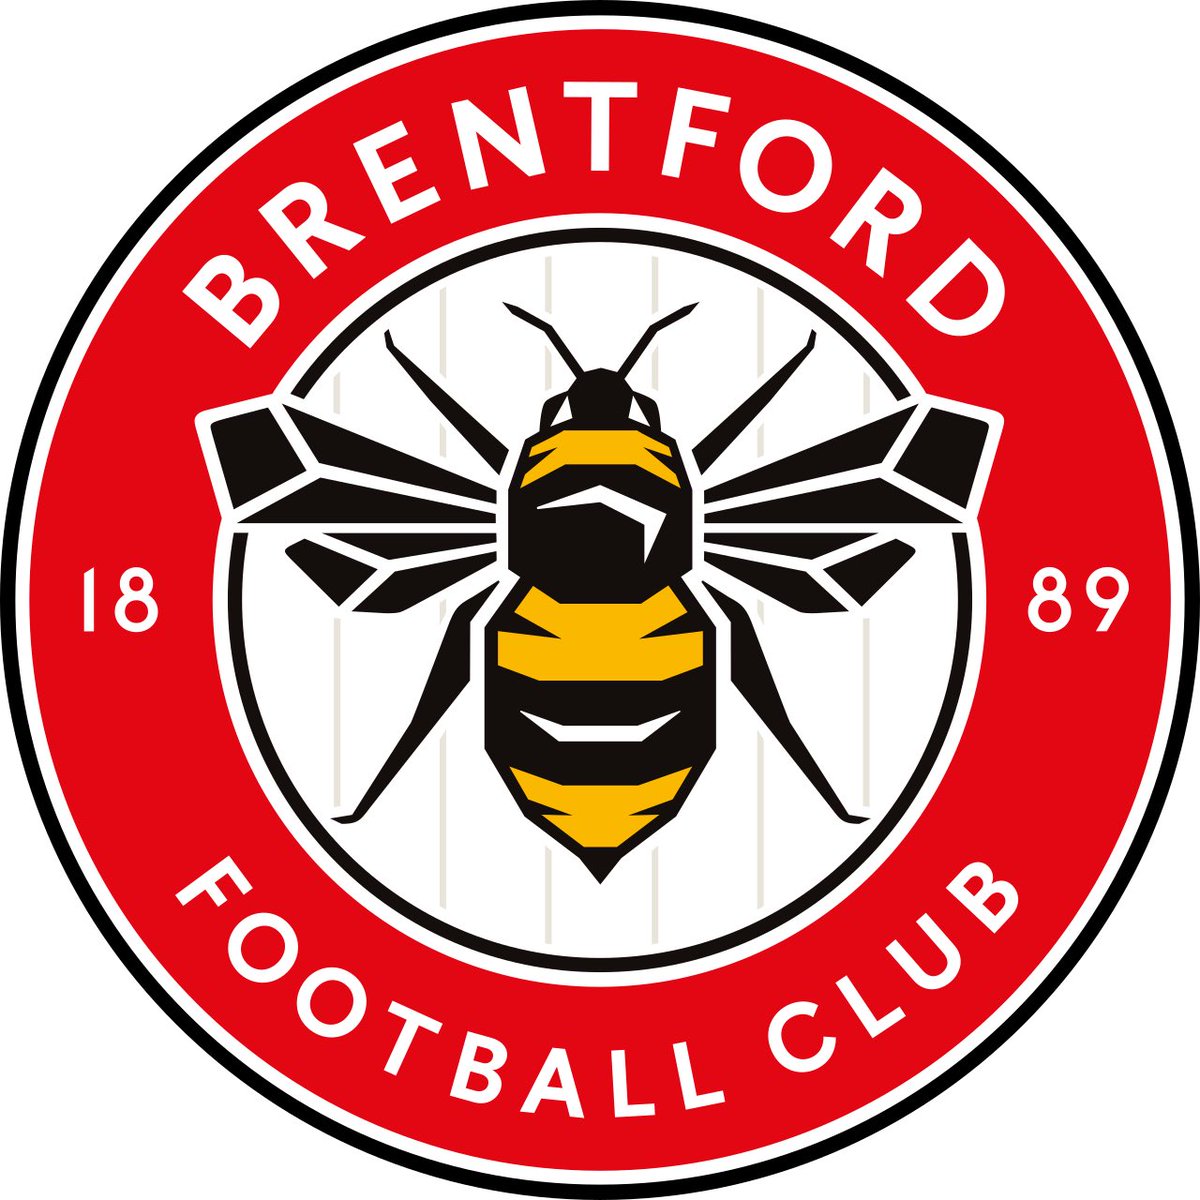 Brentford (A) now on sale to ST holders with 114+ Loyalty Points. 12 away supporters tickets remaining. The next points drop will be tomorrow at 2pm (subject to availability). #Newcastle #Brentford #NUFC #BFC